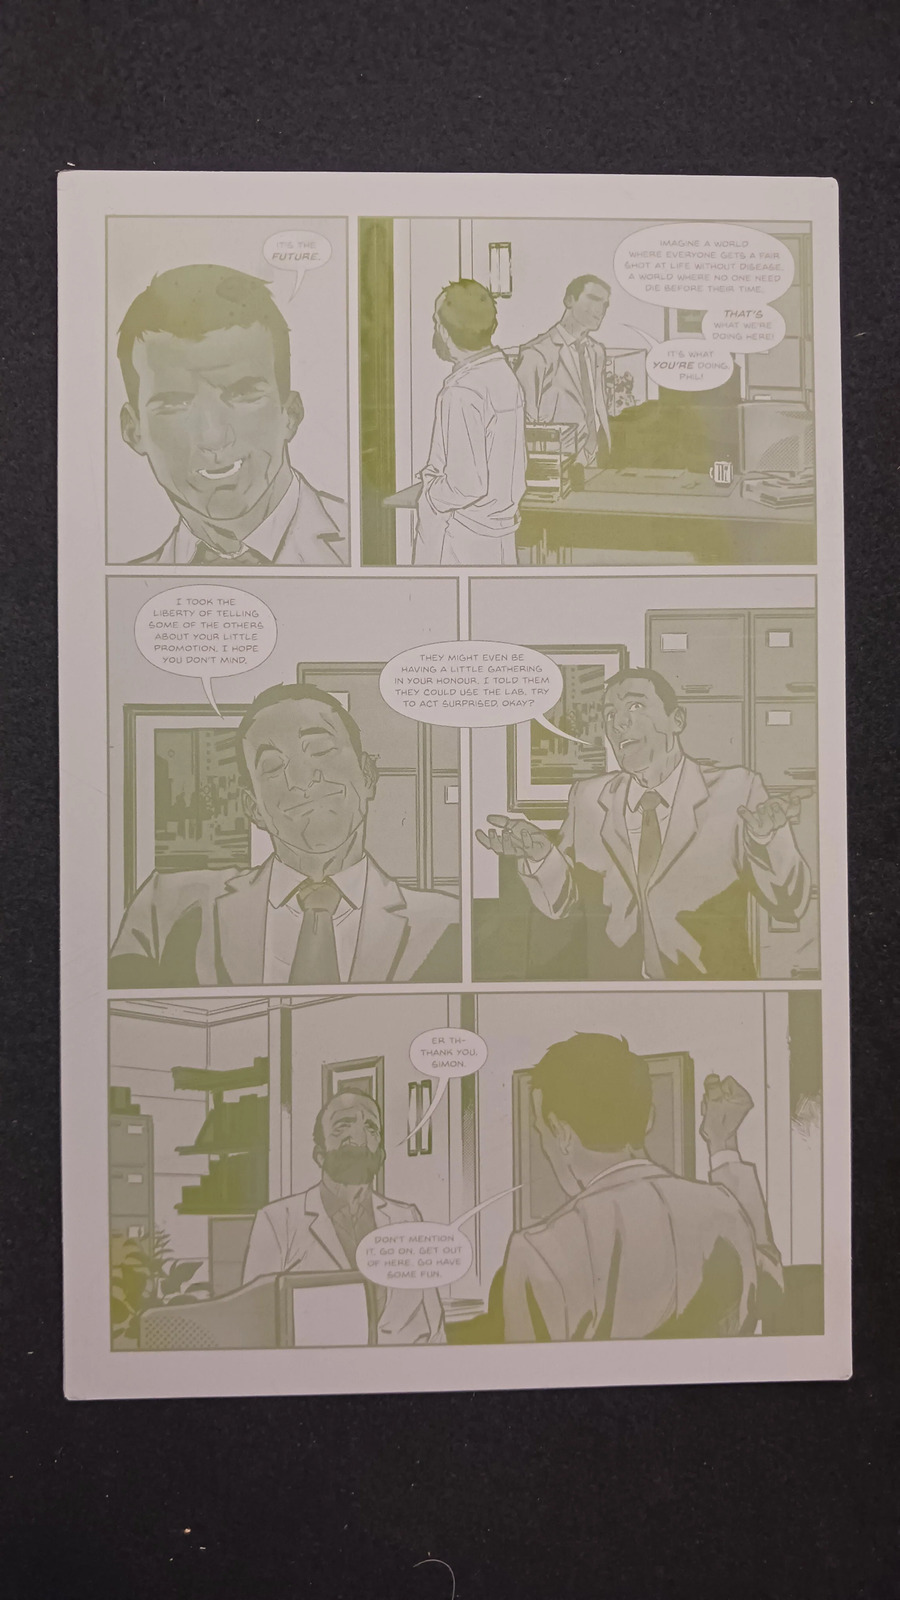 Category Zero Conflict #4 - Page 2 - PRESSWORKS - Comic Art - Printer Plate - Ye